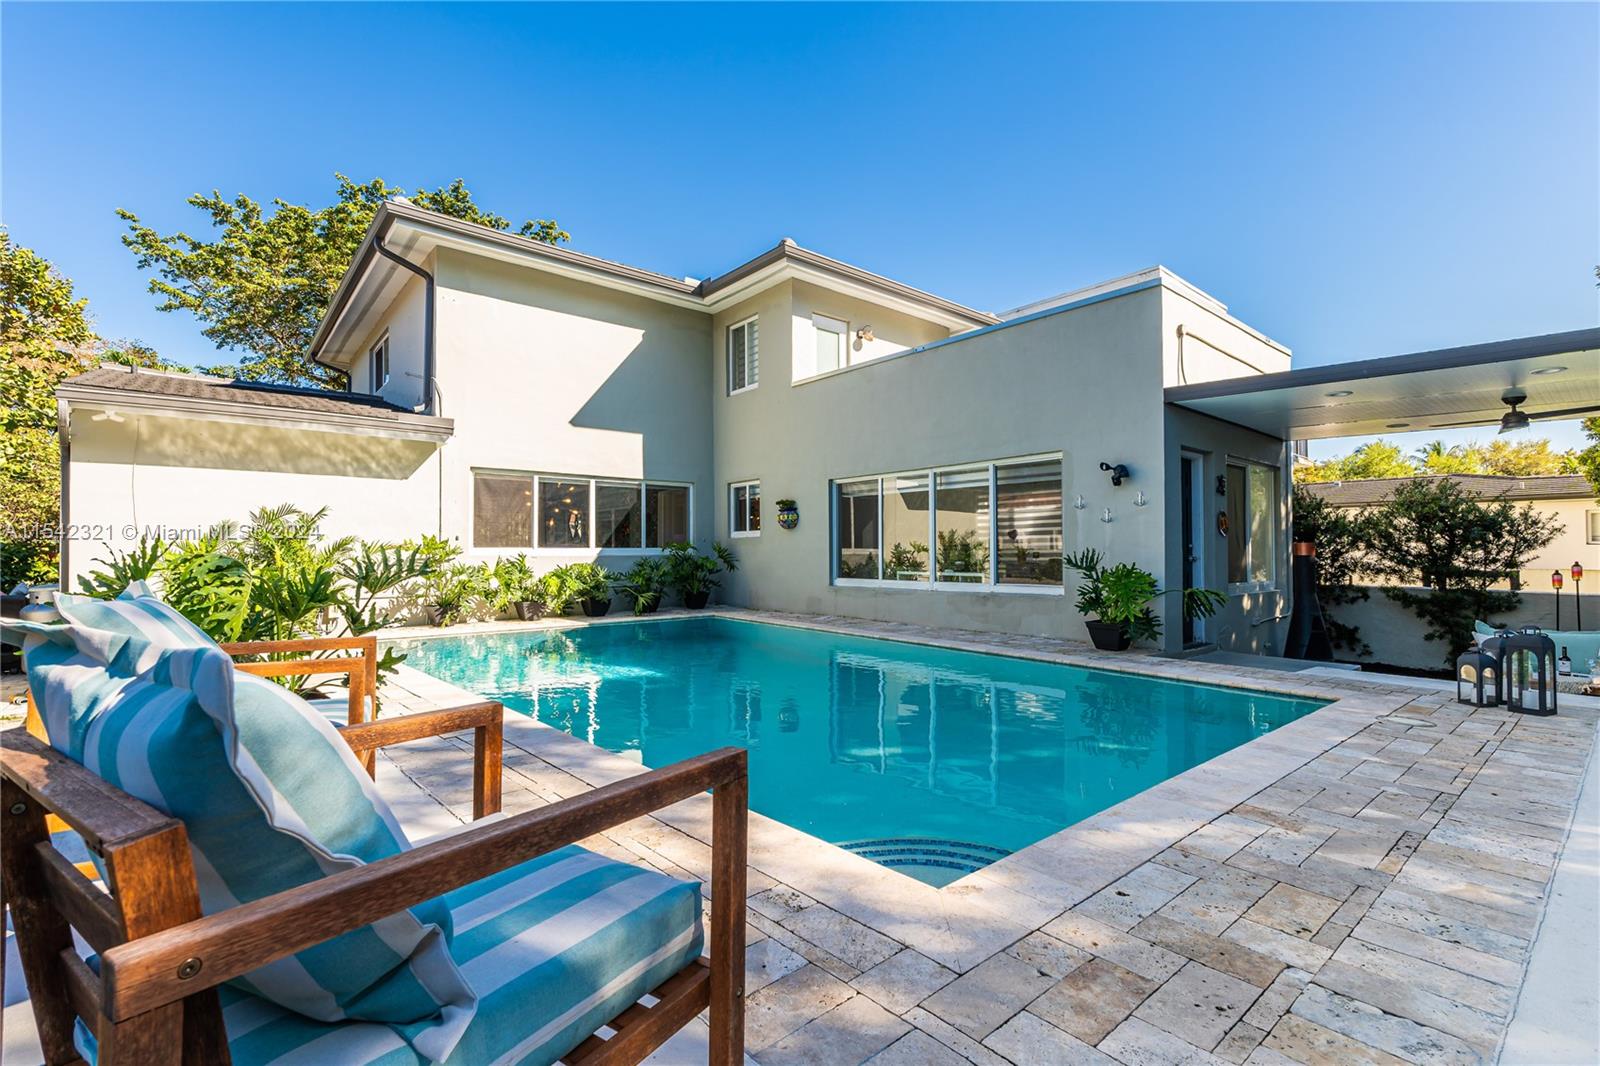 a view of house with swimming pool outdoor seating